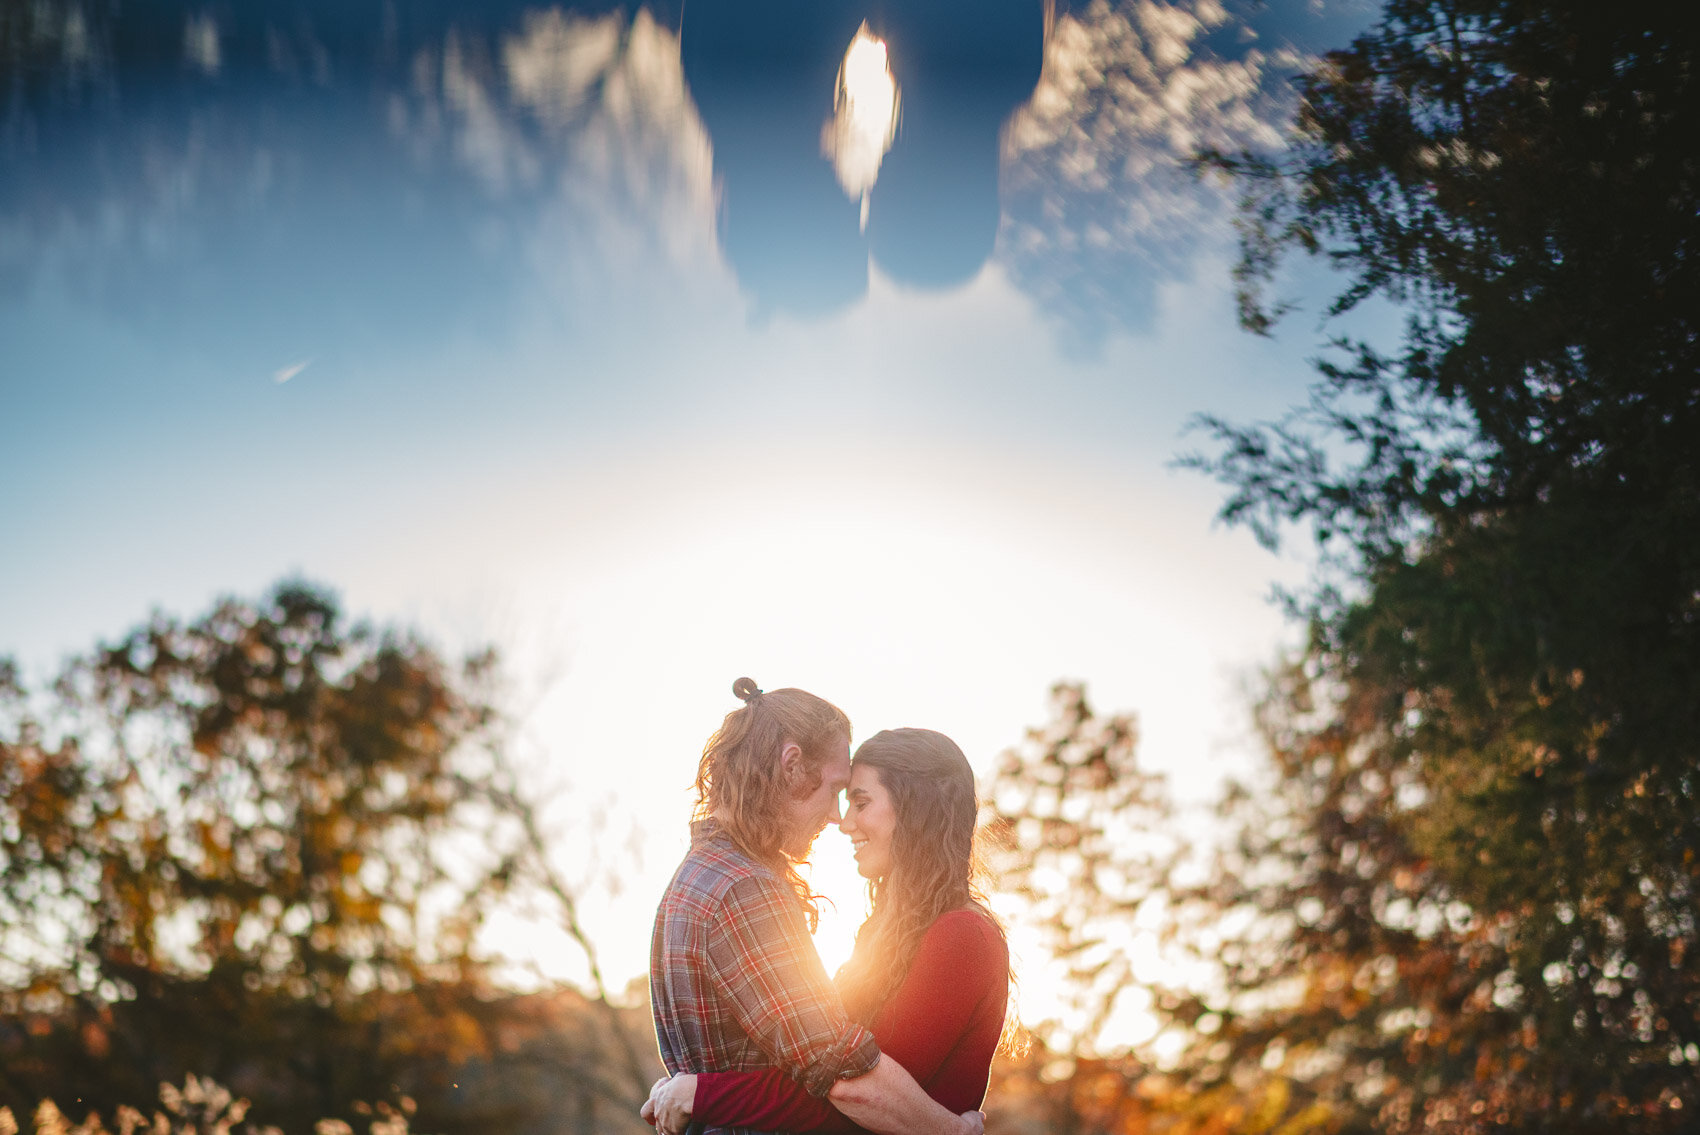 greenville illinois engagement session moses and emily-11.jpg